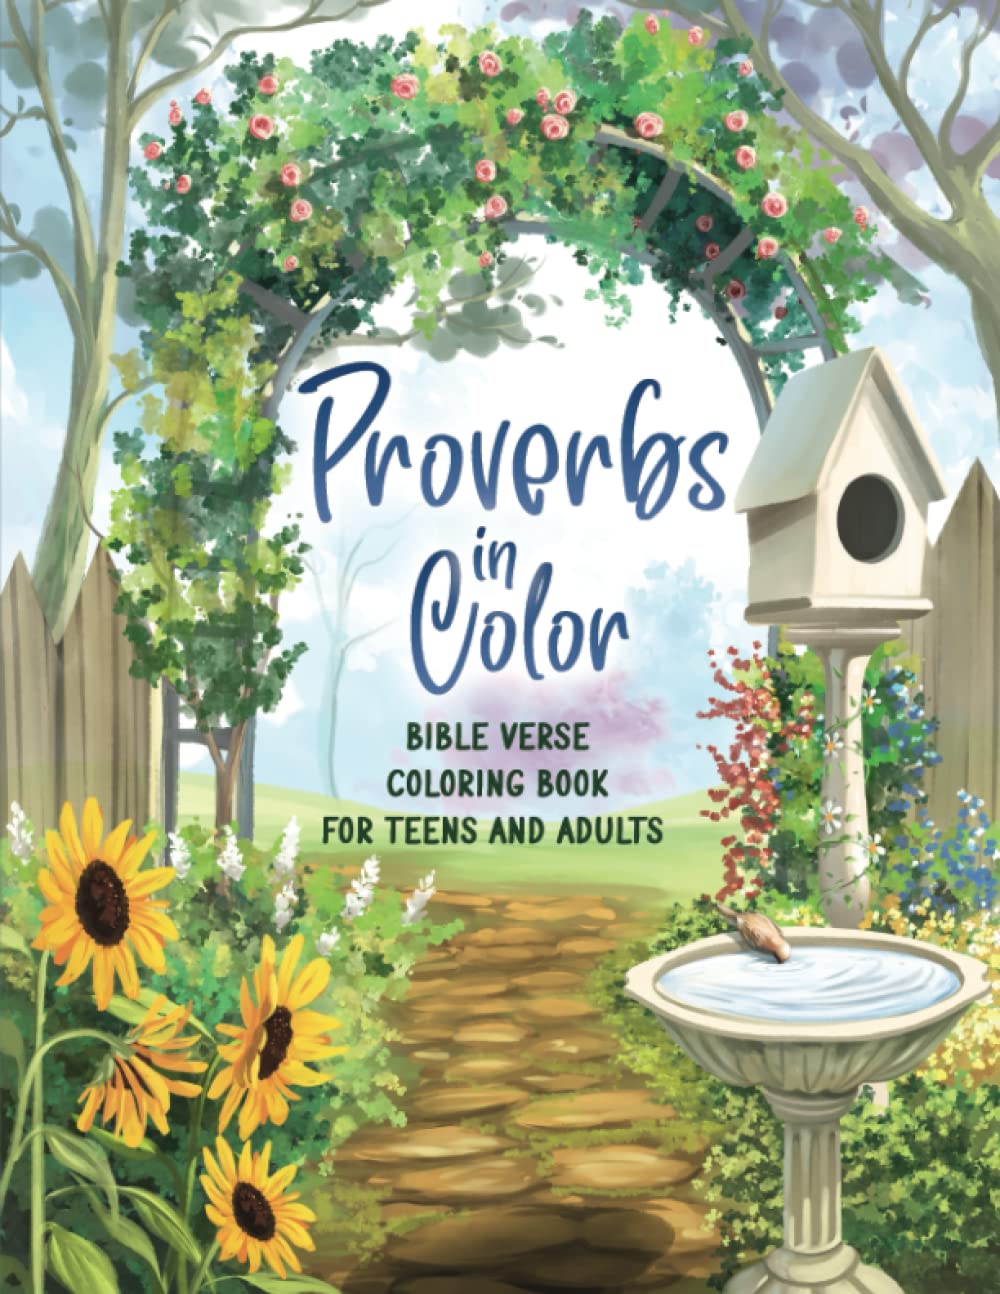 Proverbs In Color: Bible Verse Coloring Book For Teens and Adults